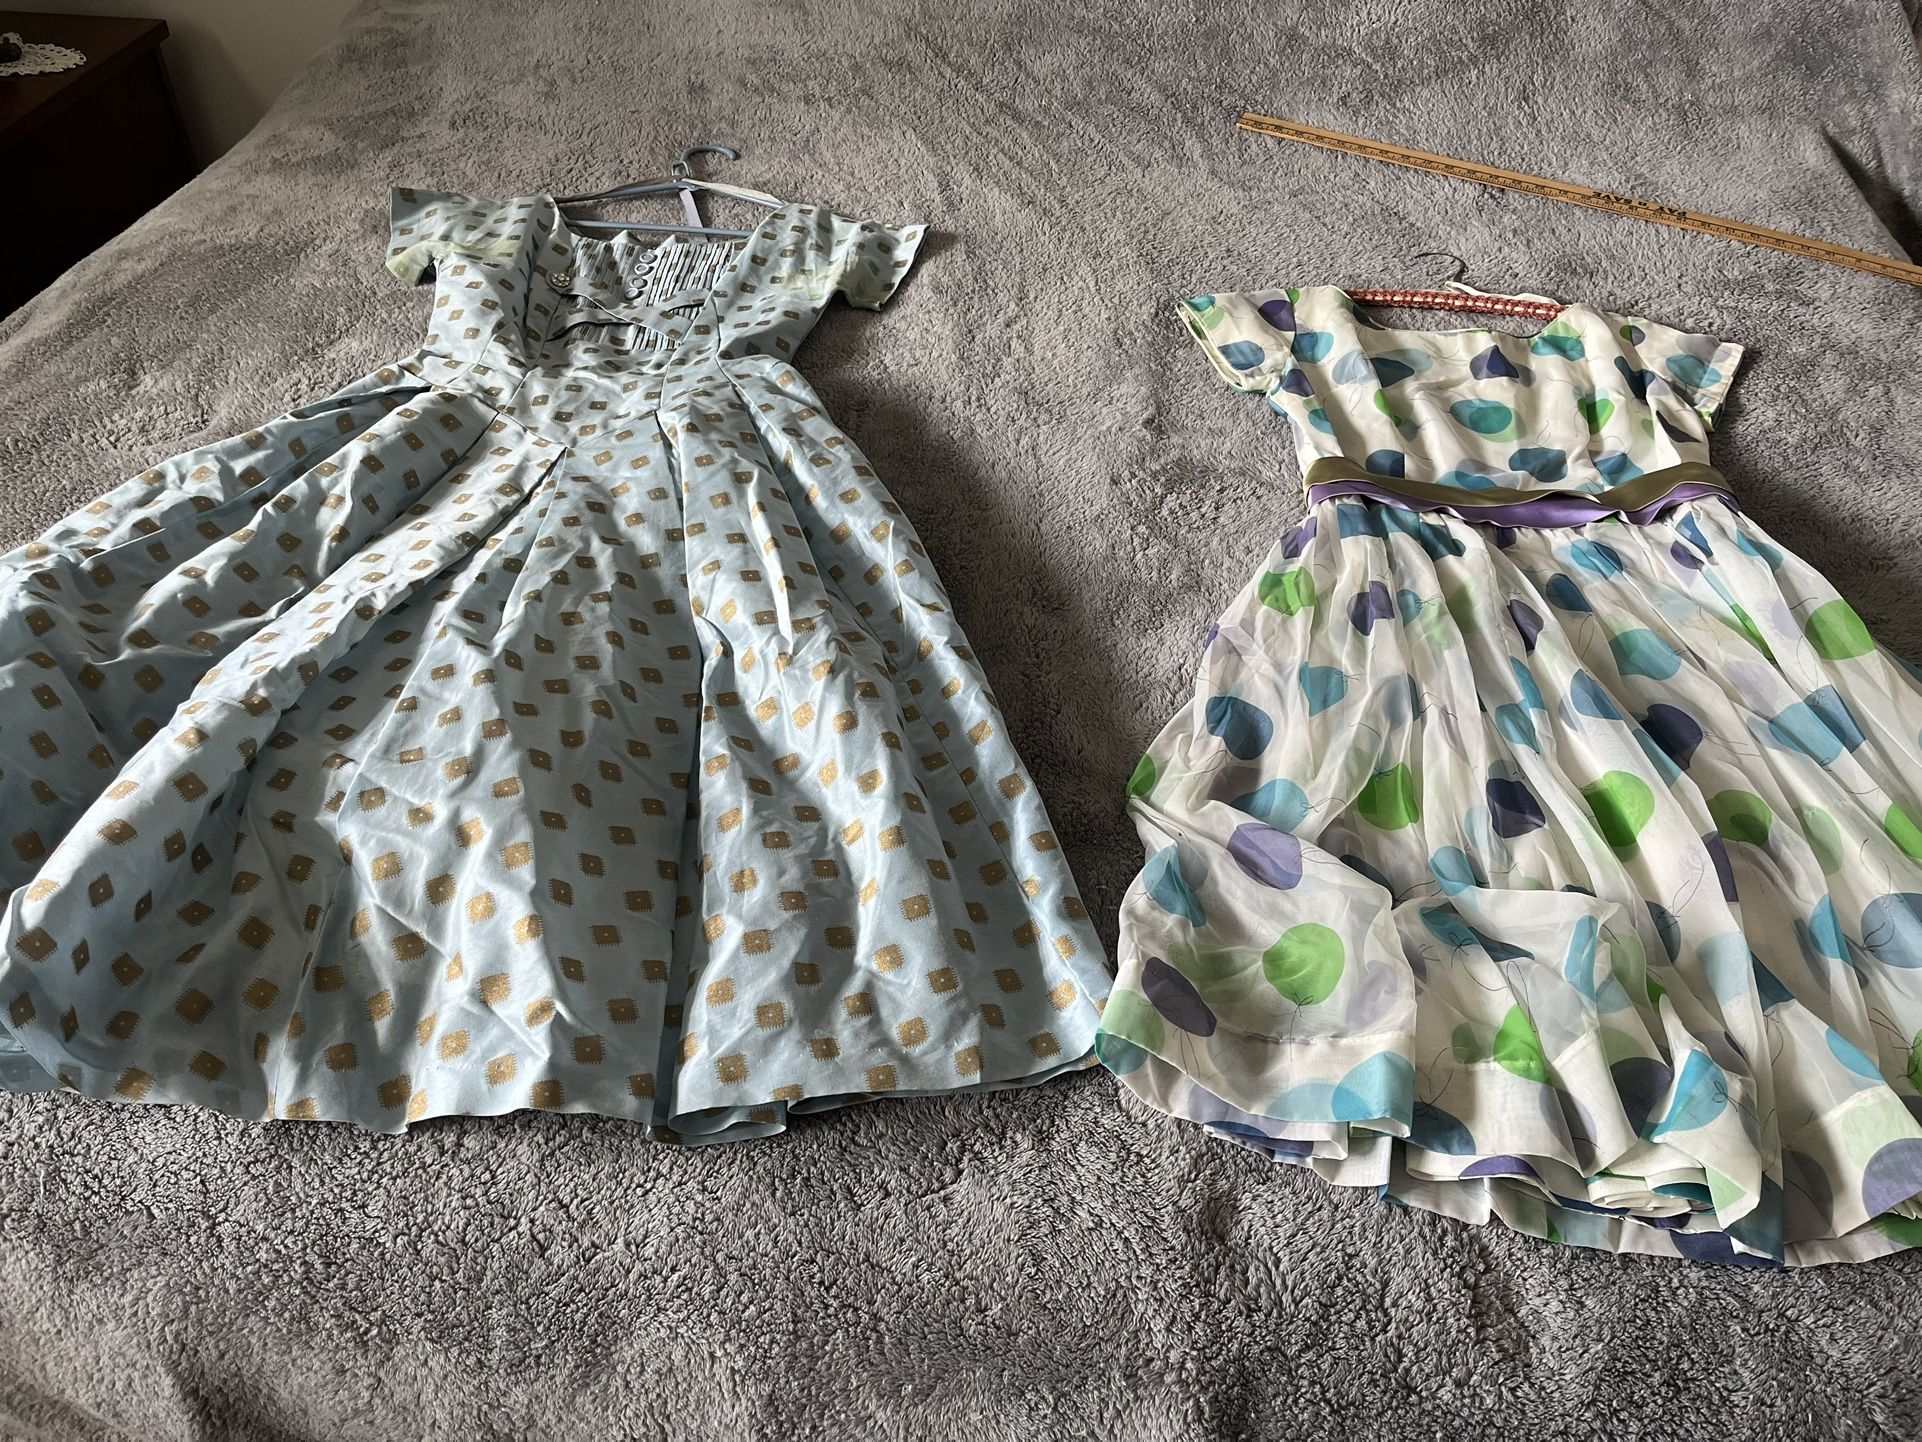 Vintage Dresses from the 60's or  early 70's. Both for $5. 